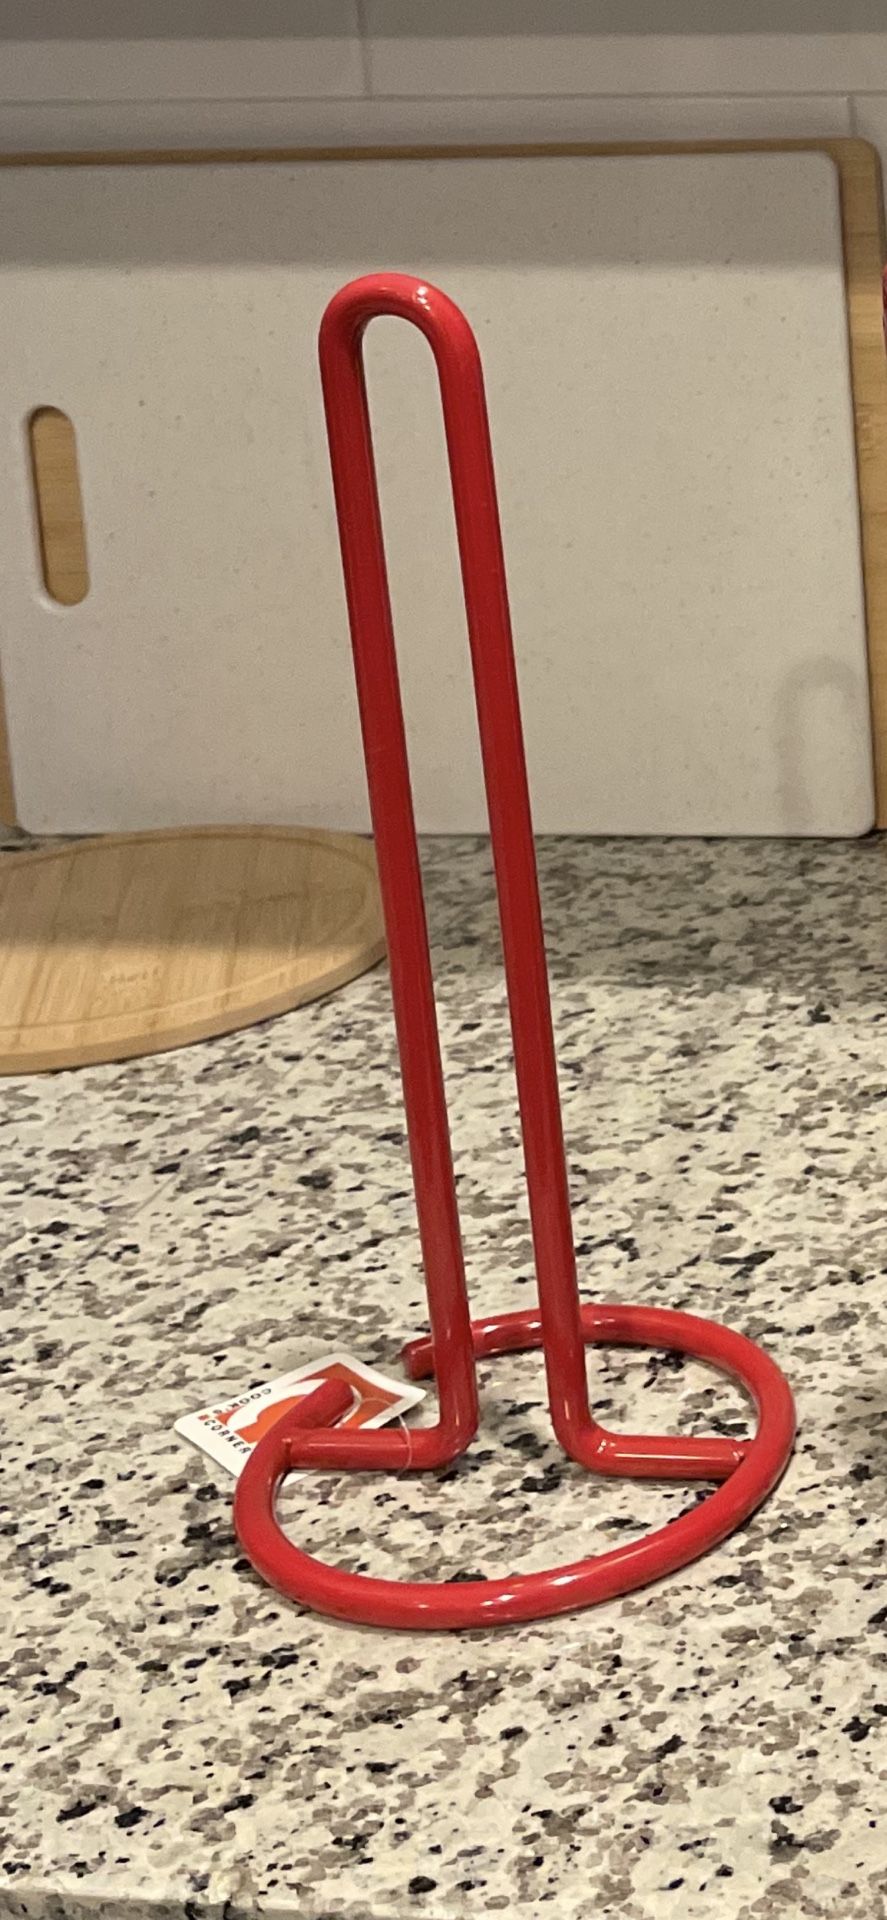 brand new red paper towel holder